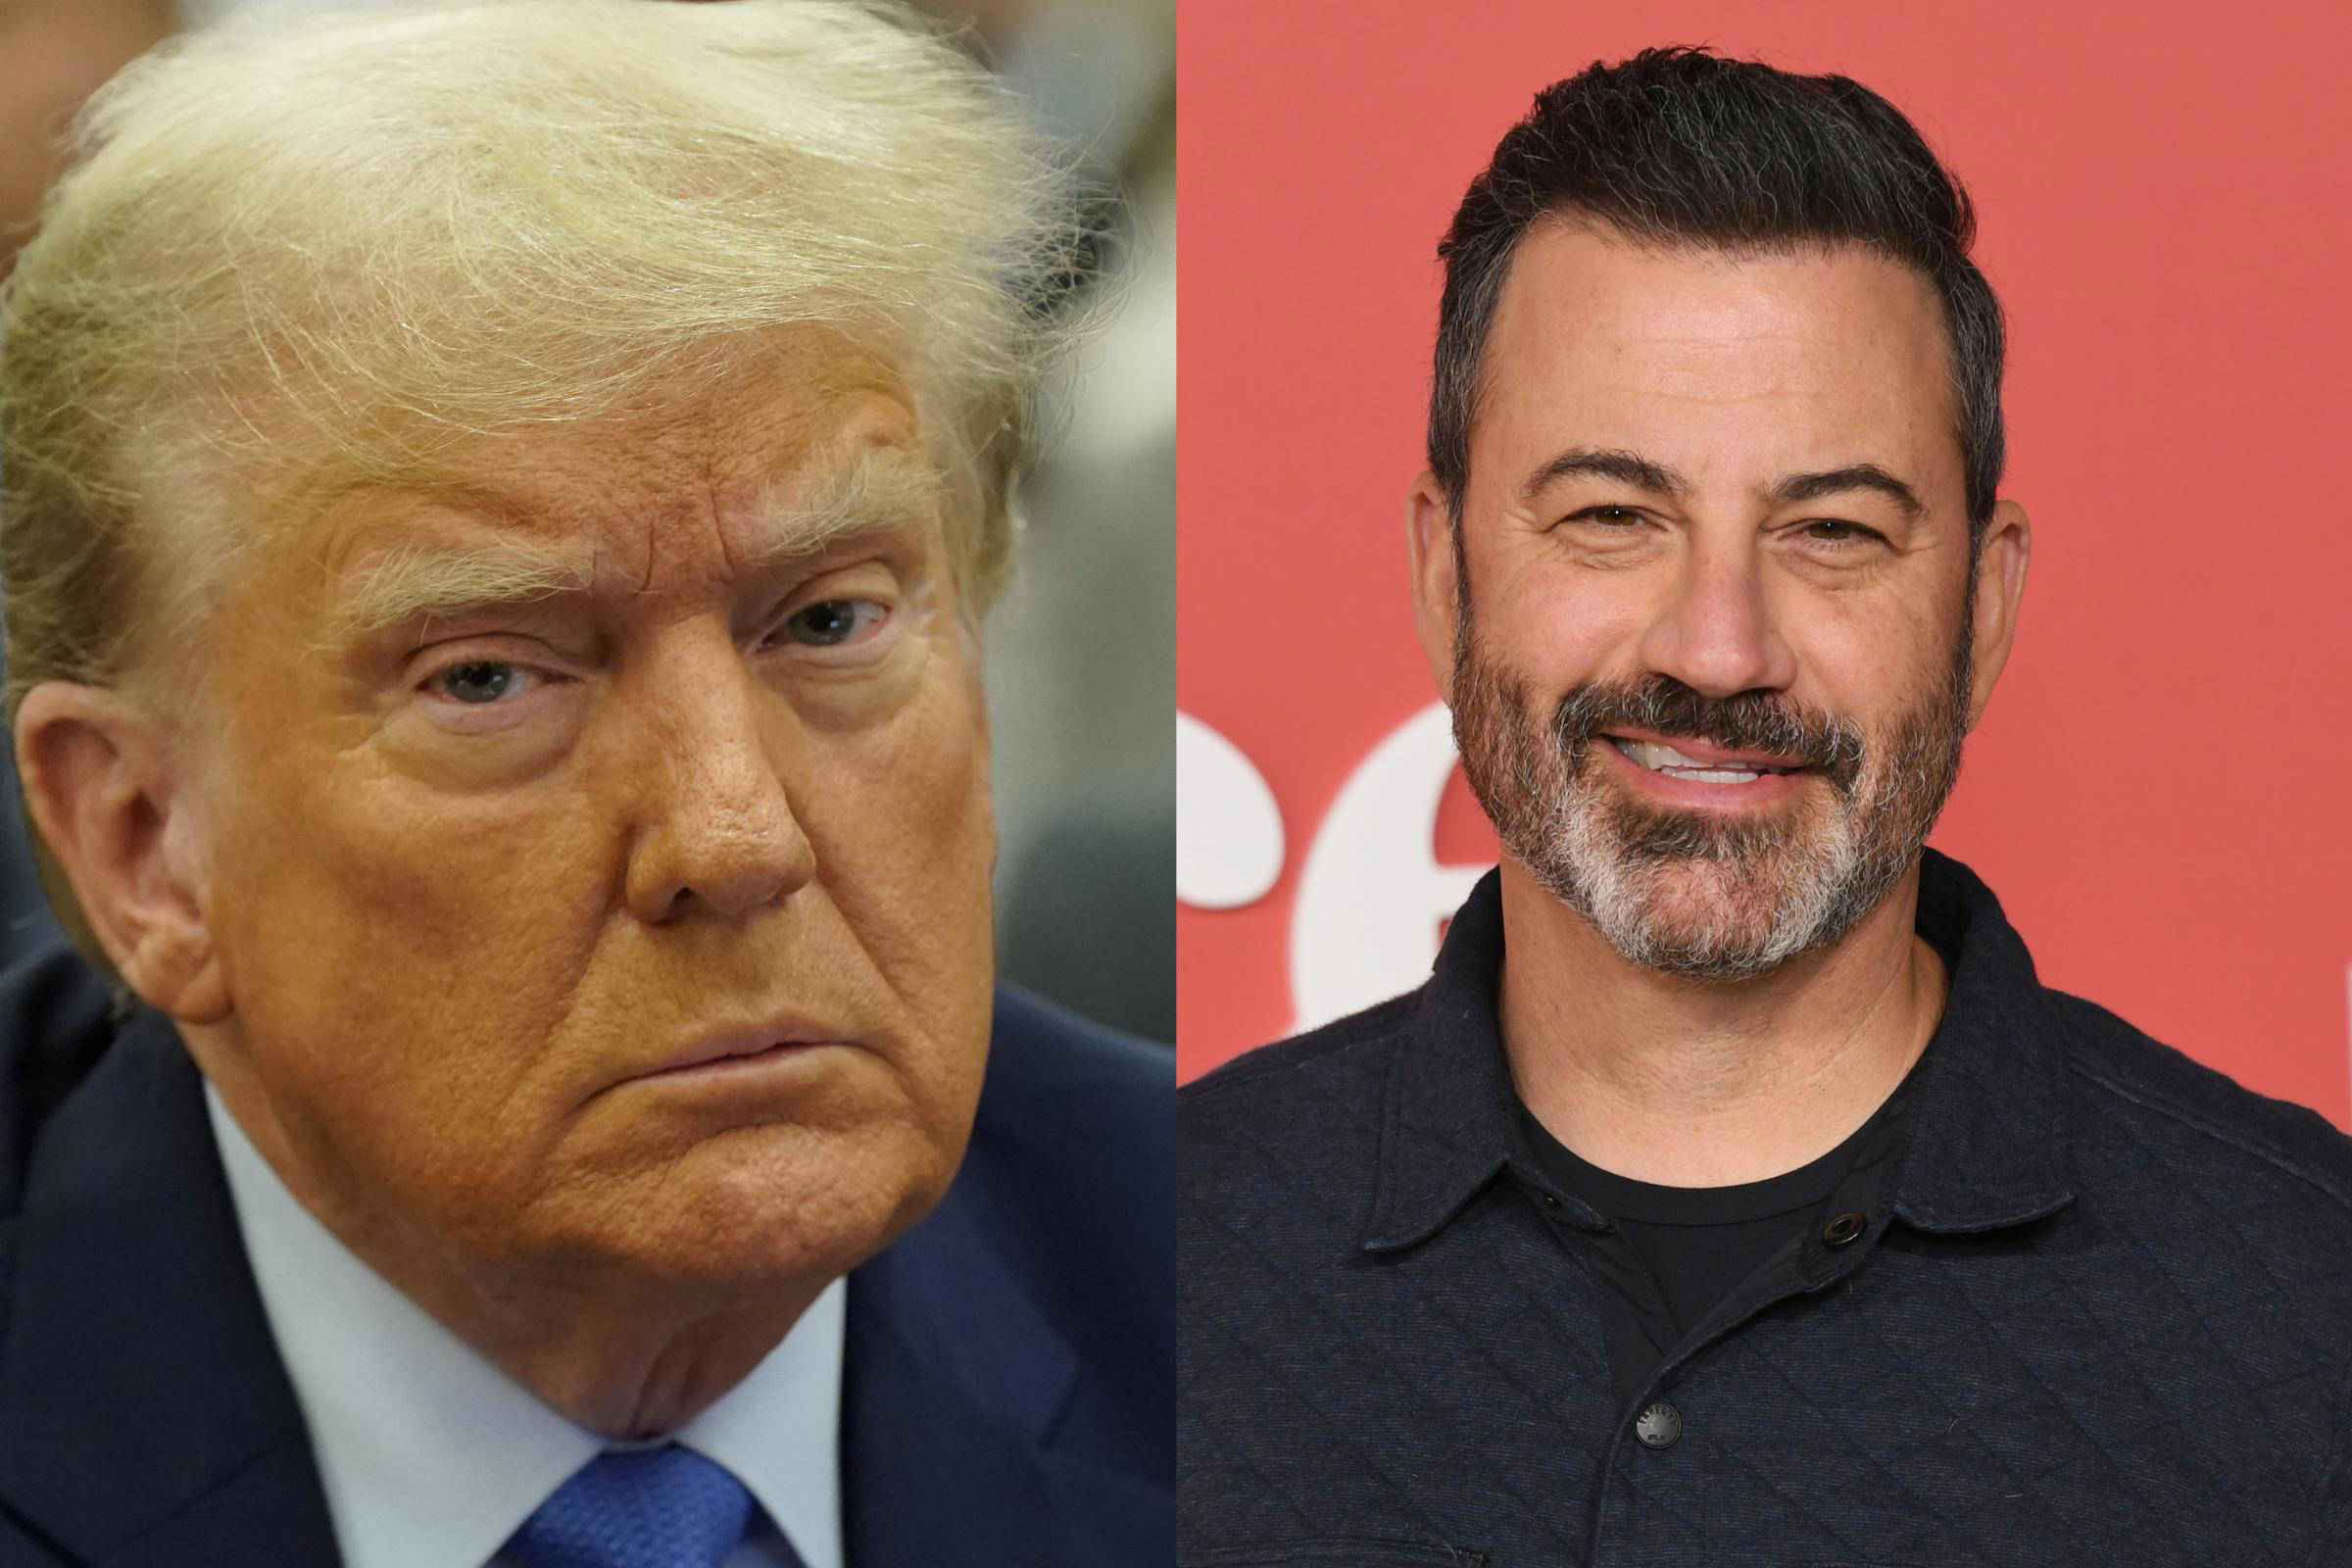 Jimmy Kimmel Eviscerates Donald Trump Over Court Appearance